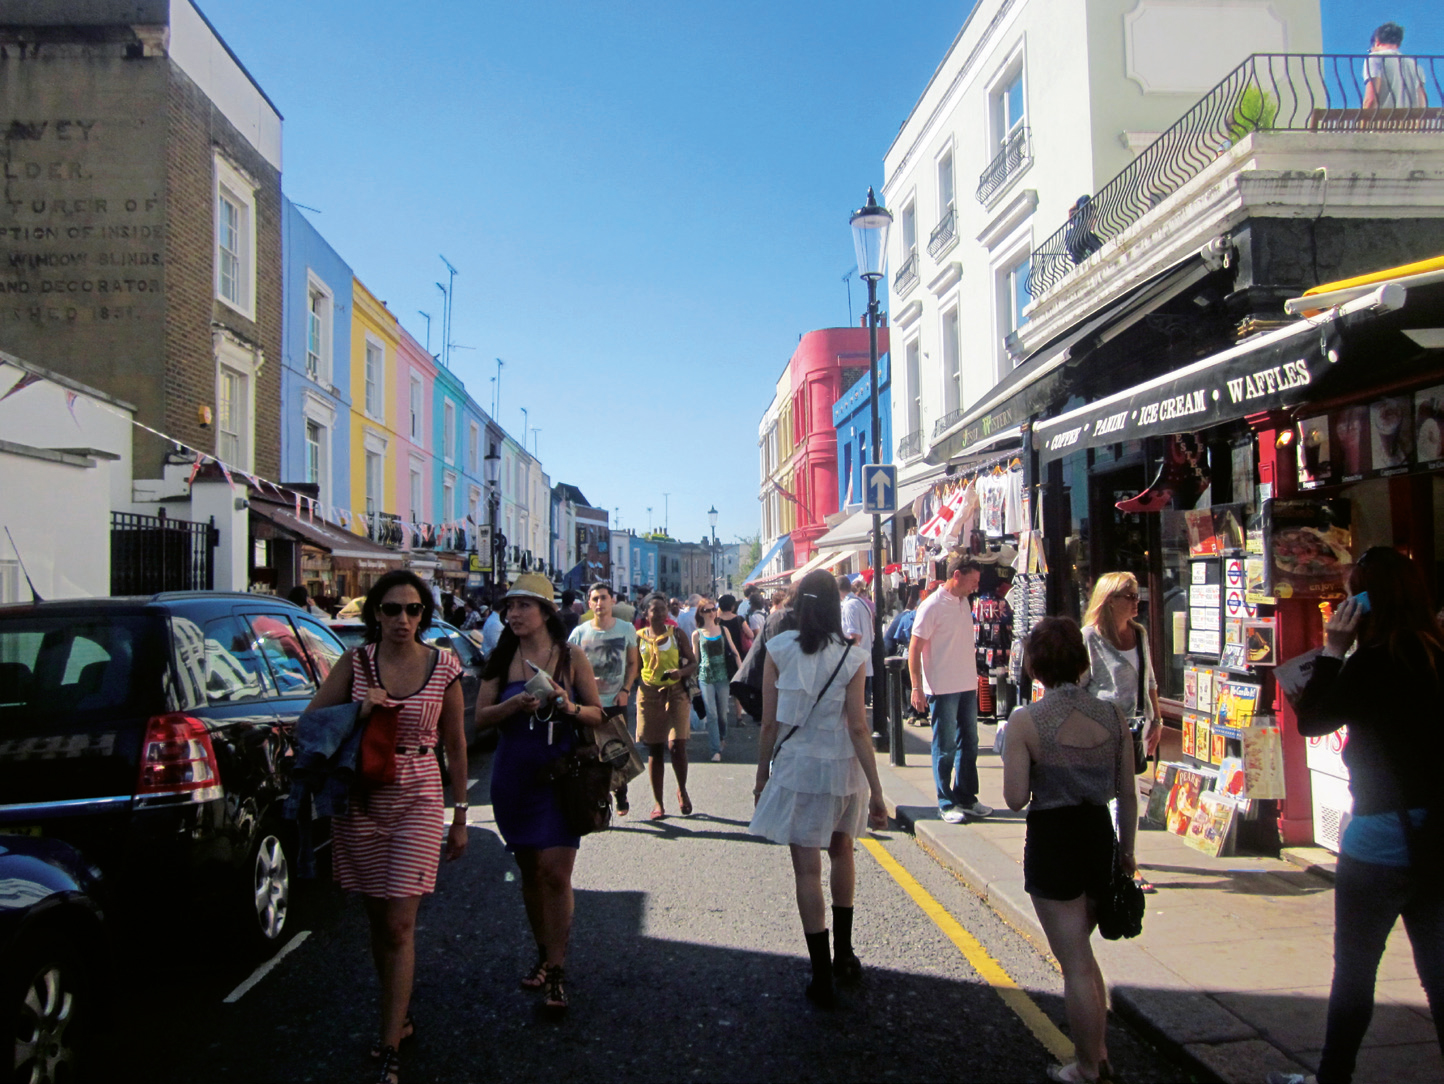 Shopping in Notting Hill